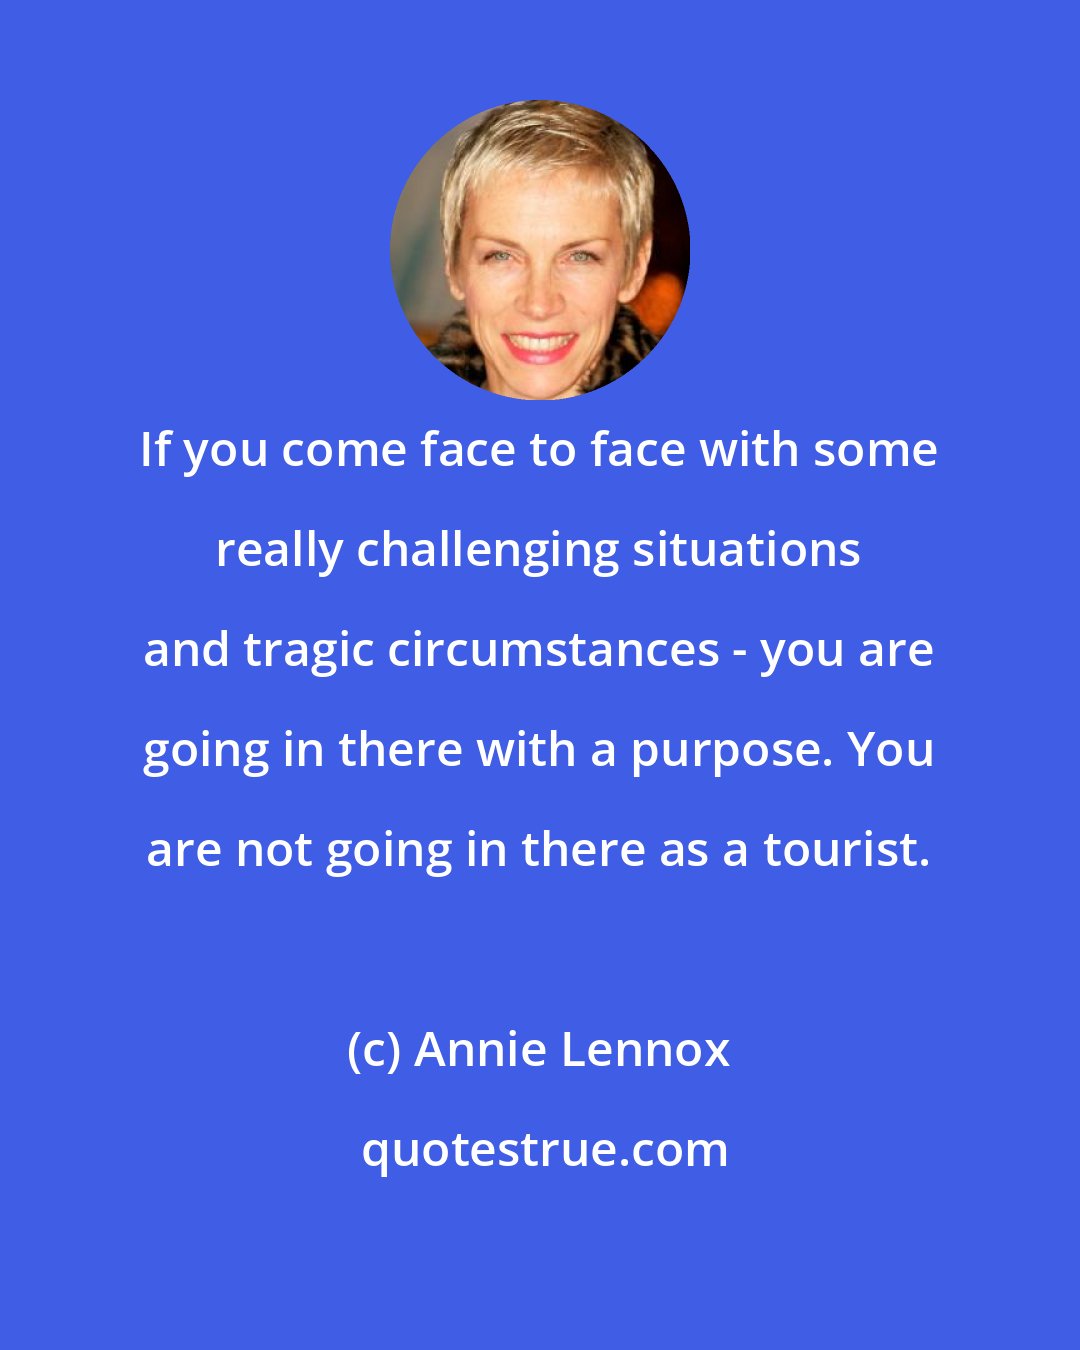 Annie Lennox: If you come face to face with some really challenging situations and tragic circumstances - you are going in there with a purpose. You are not going in there as a tourist.